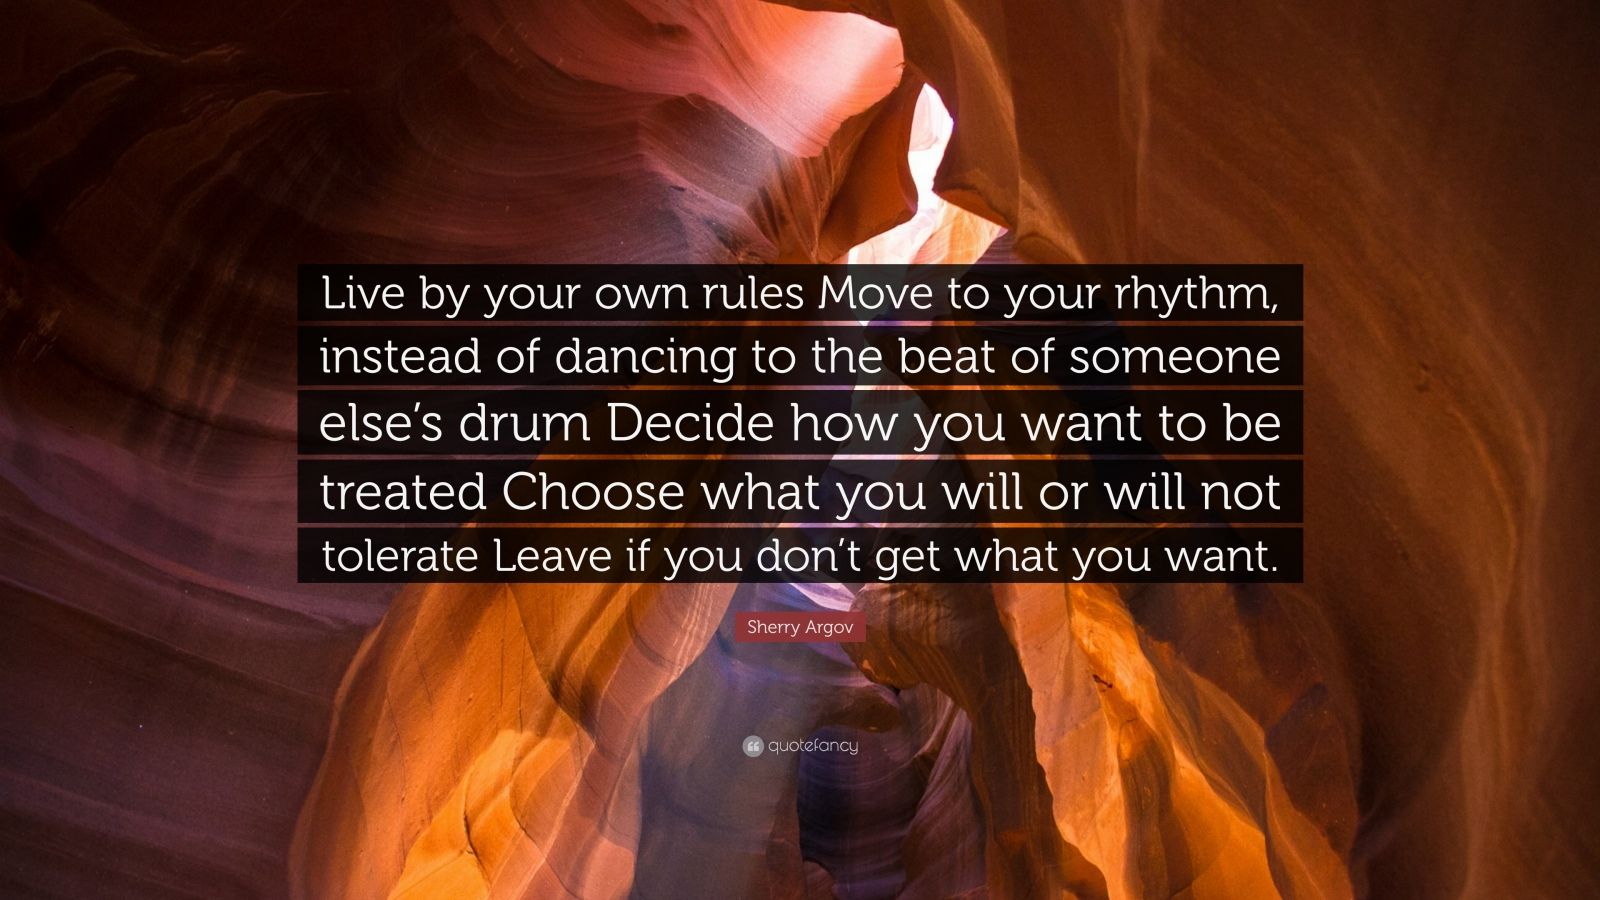 Sherry Argov Quote: “Live by your own rules Move to your rhythm